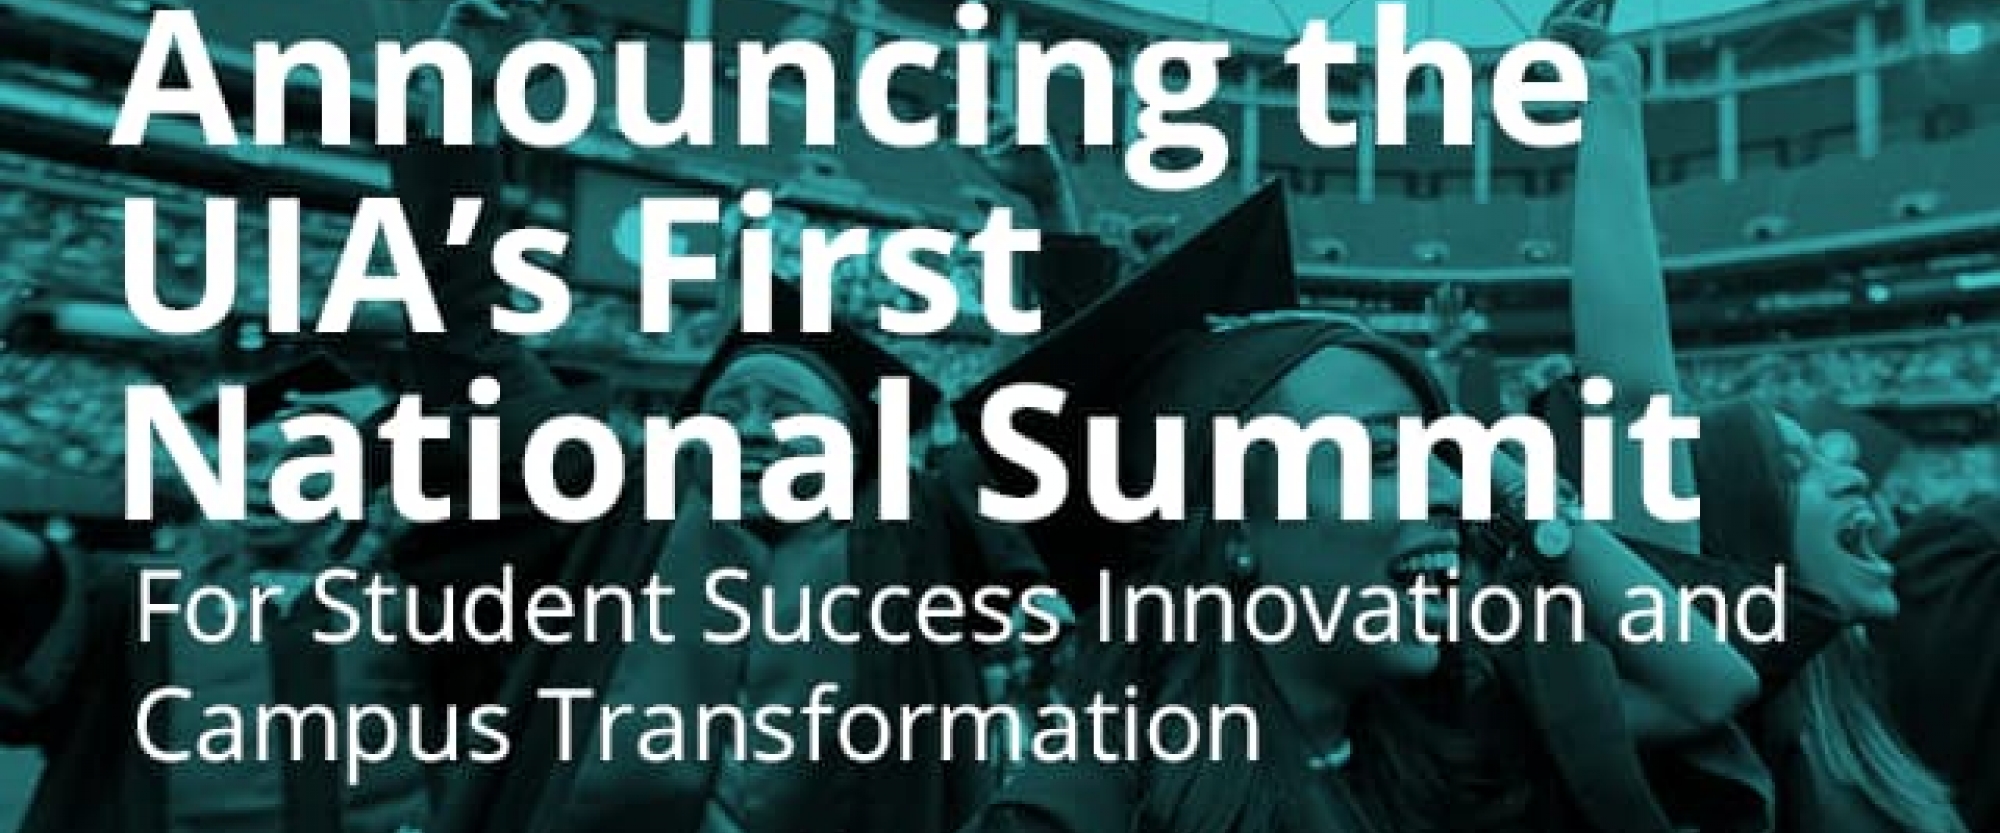 Announcing our first National Summit for Student Success Innovation